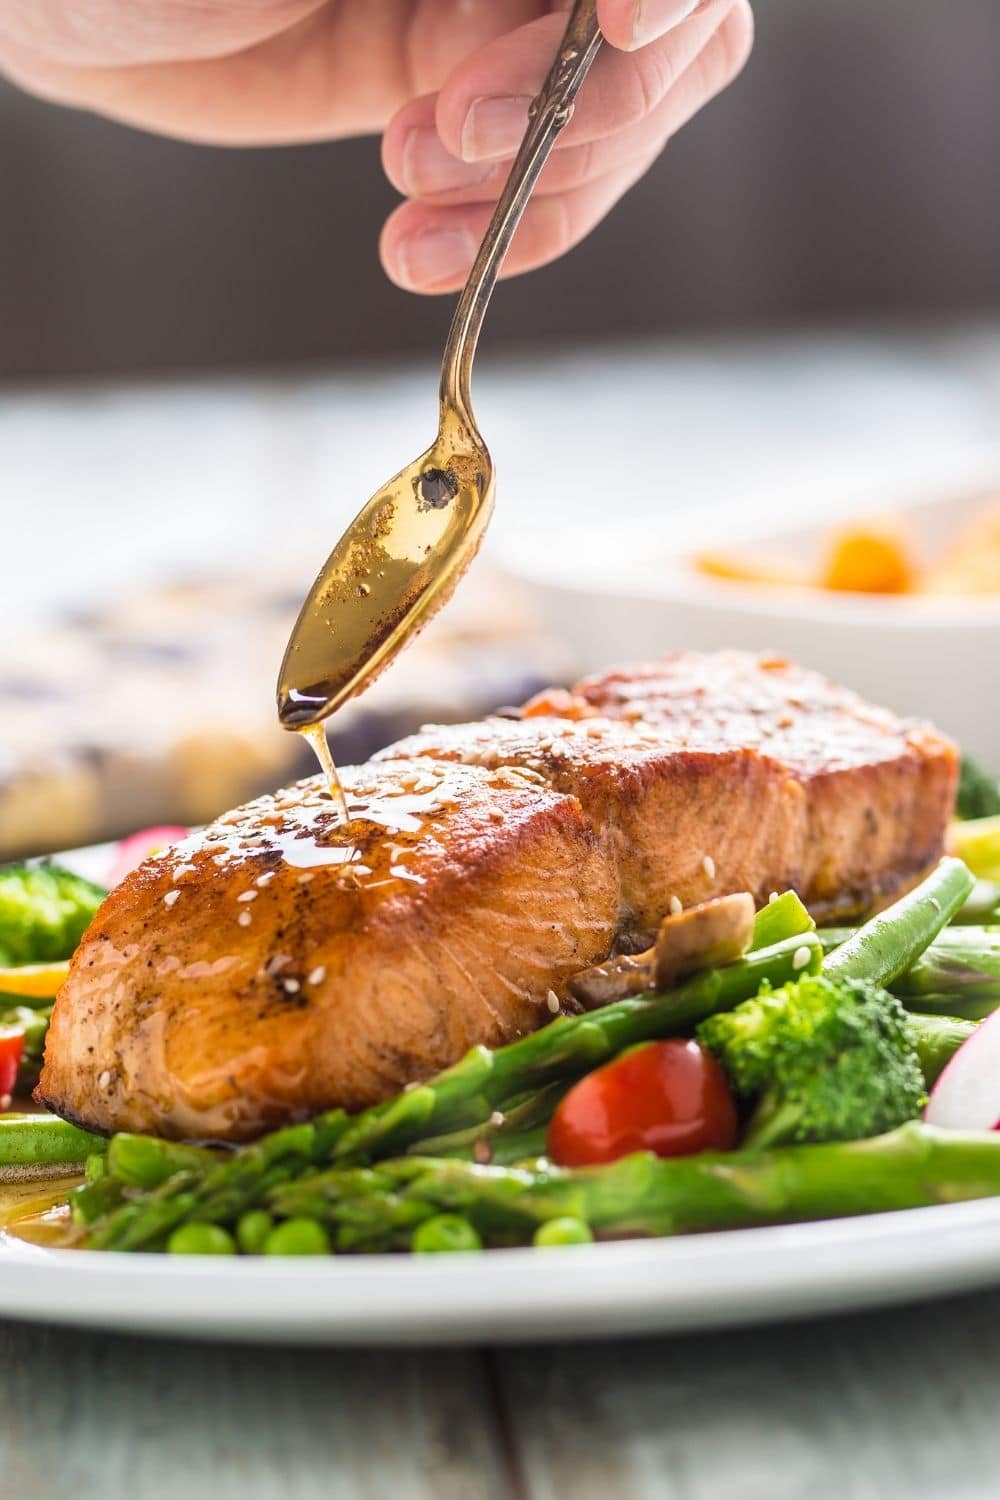 https://insanelygoodrecipes.com/wp-content/uploads/2021/05/Salmon-Fillet-with-Asparagus.jpg